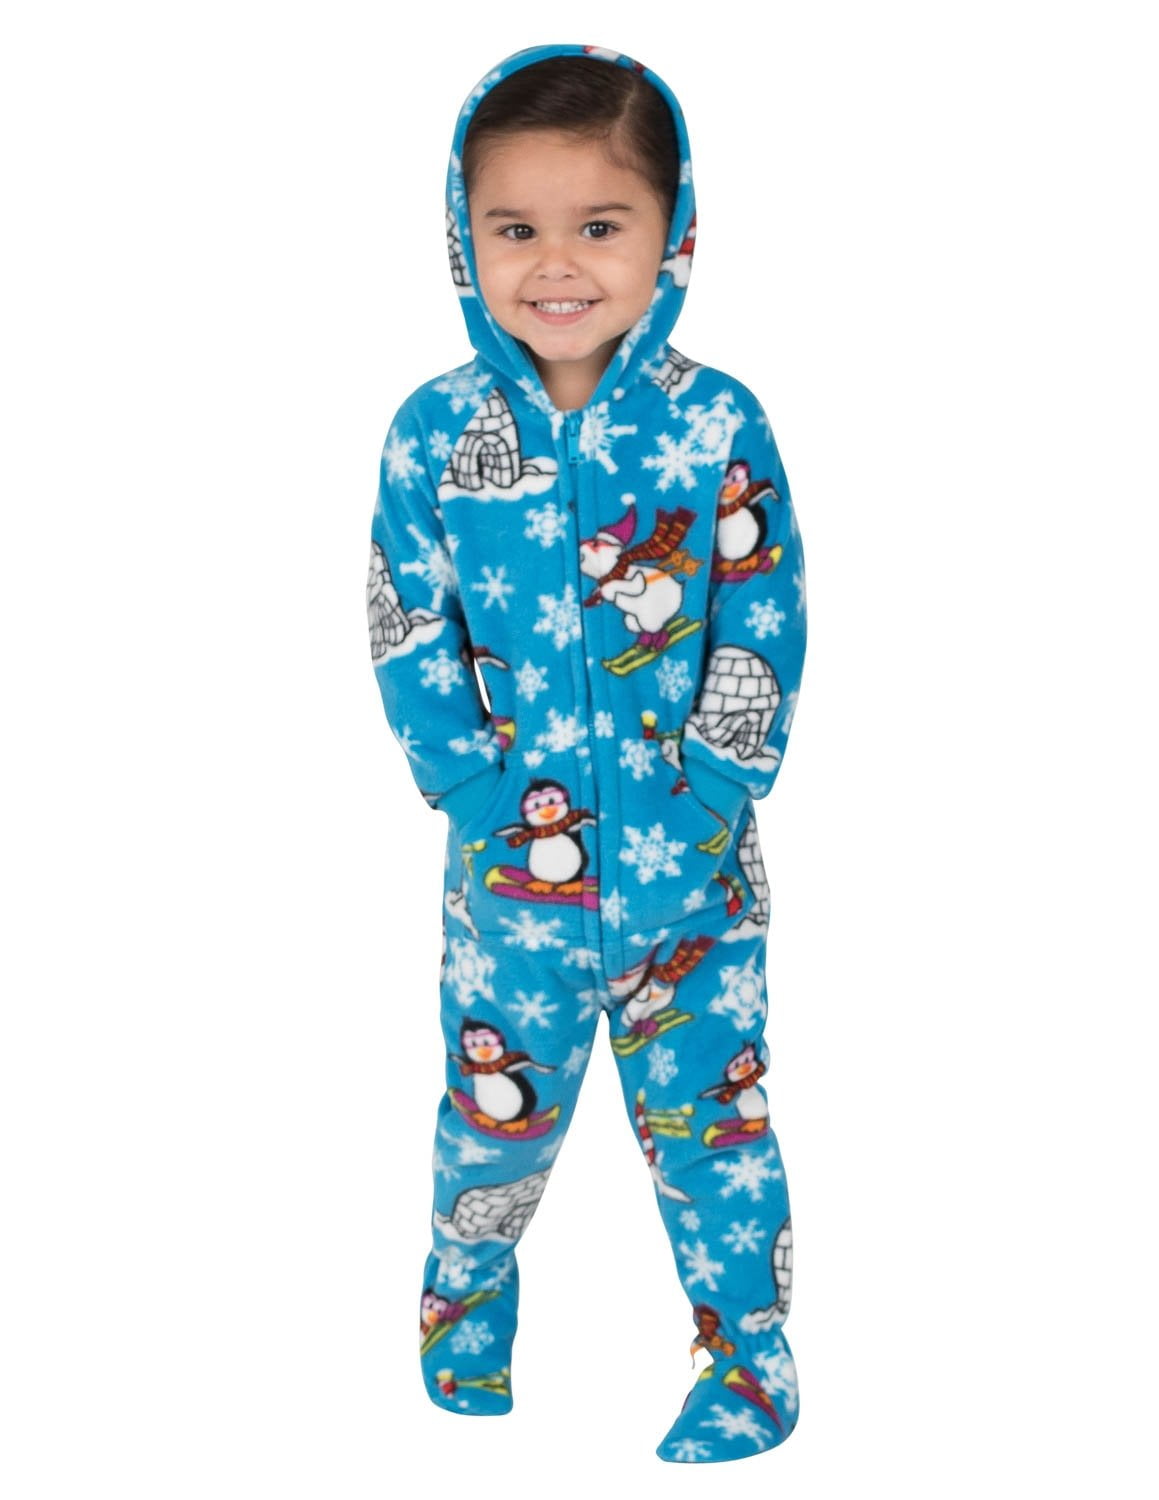 Men Footed Pajamas Family Matching School of Sharks Hoodie Onesies for Boys Toddler Fits 30-33 Women and Pets Girls Medium 